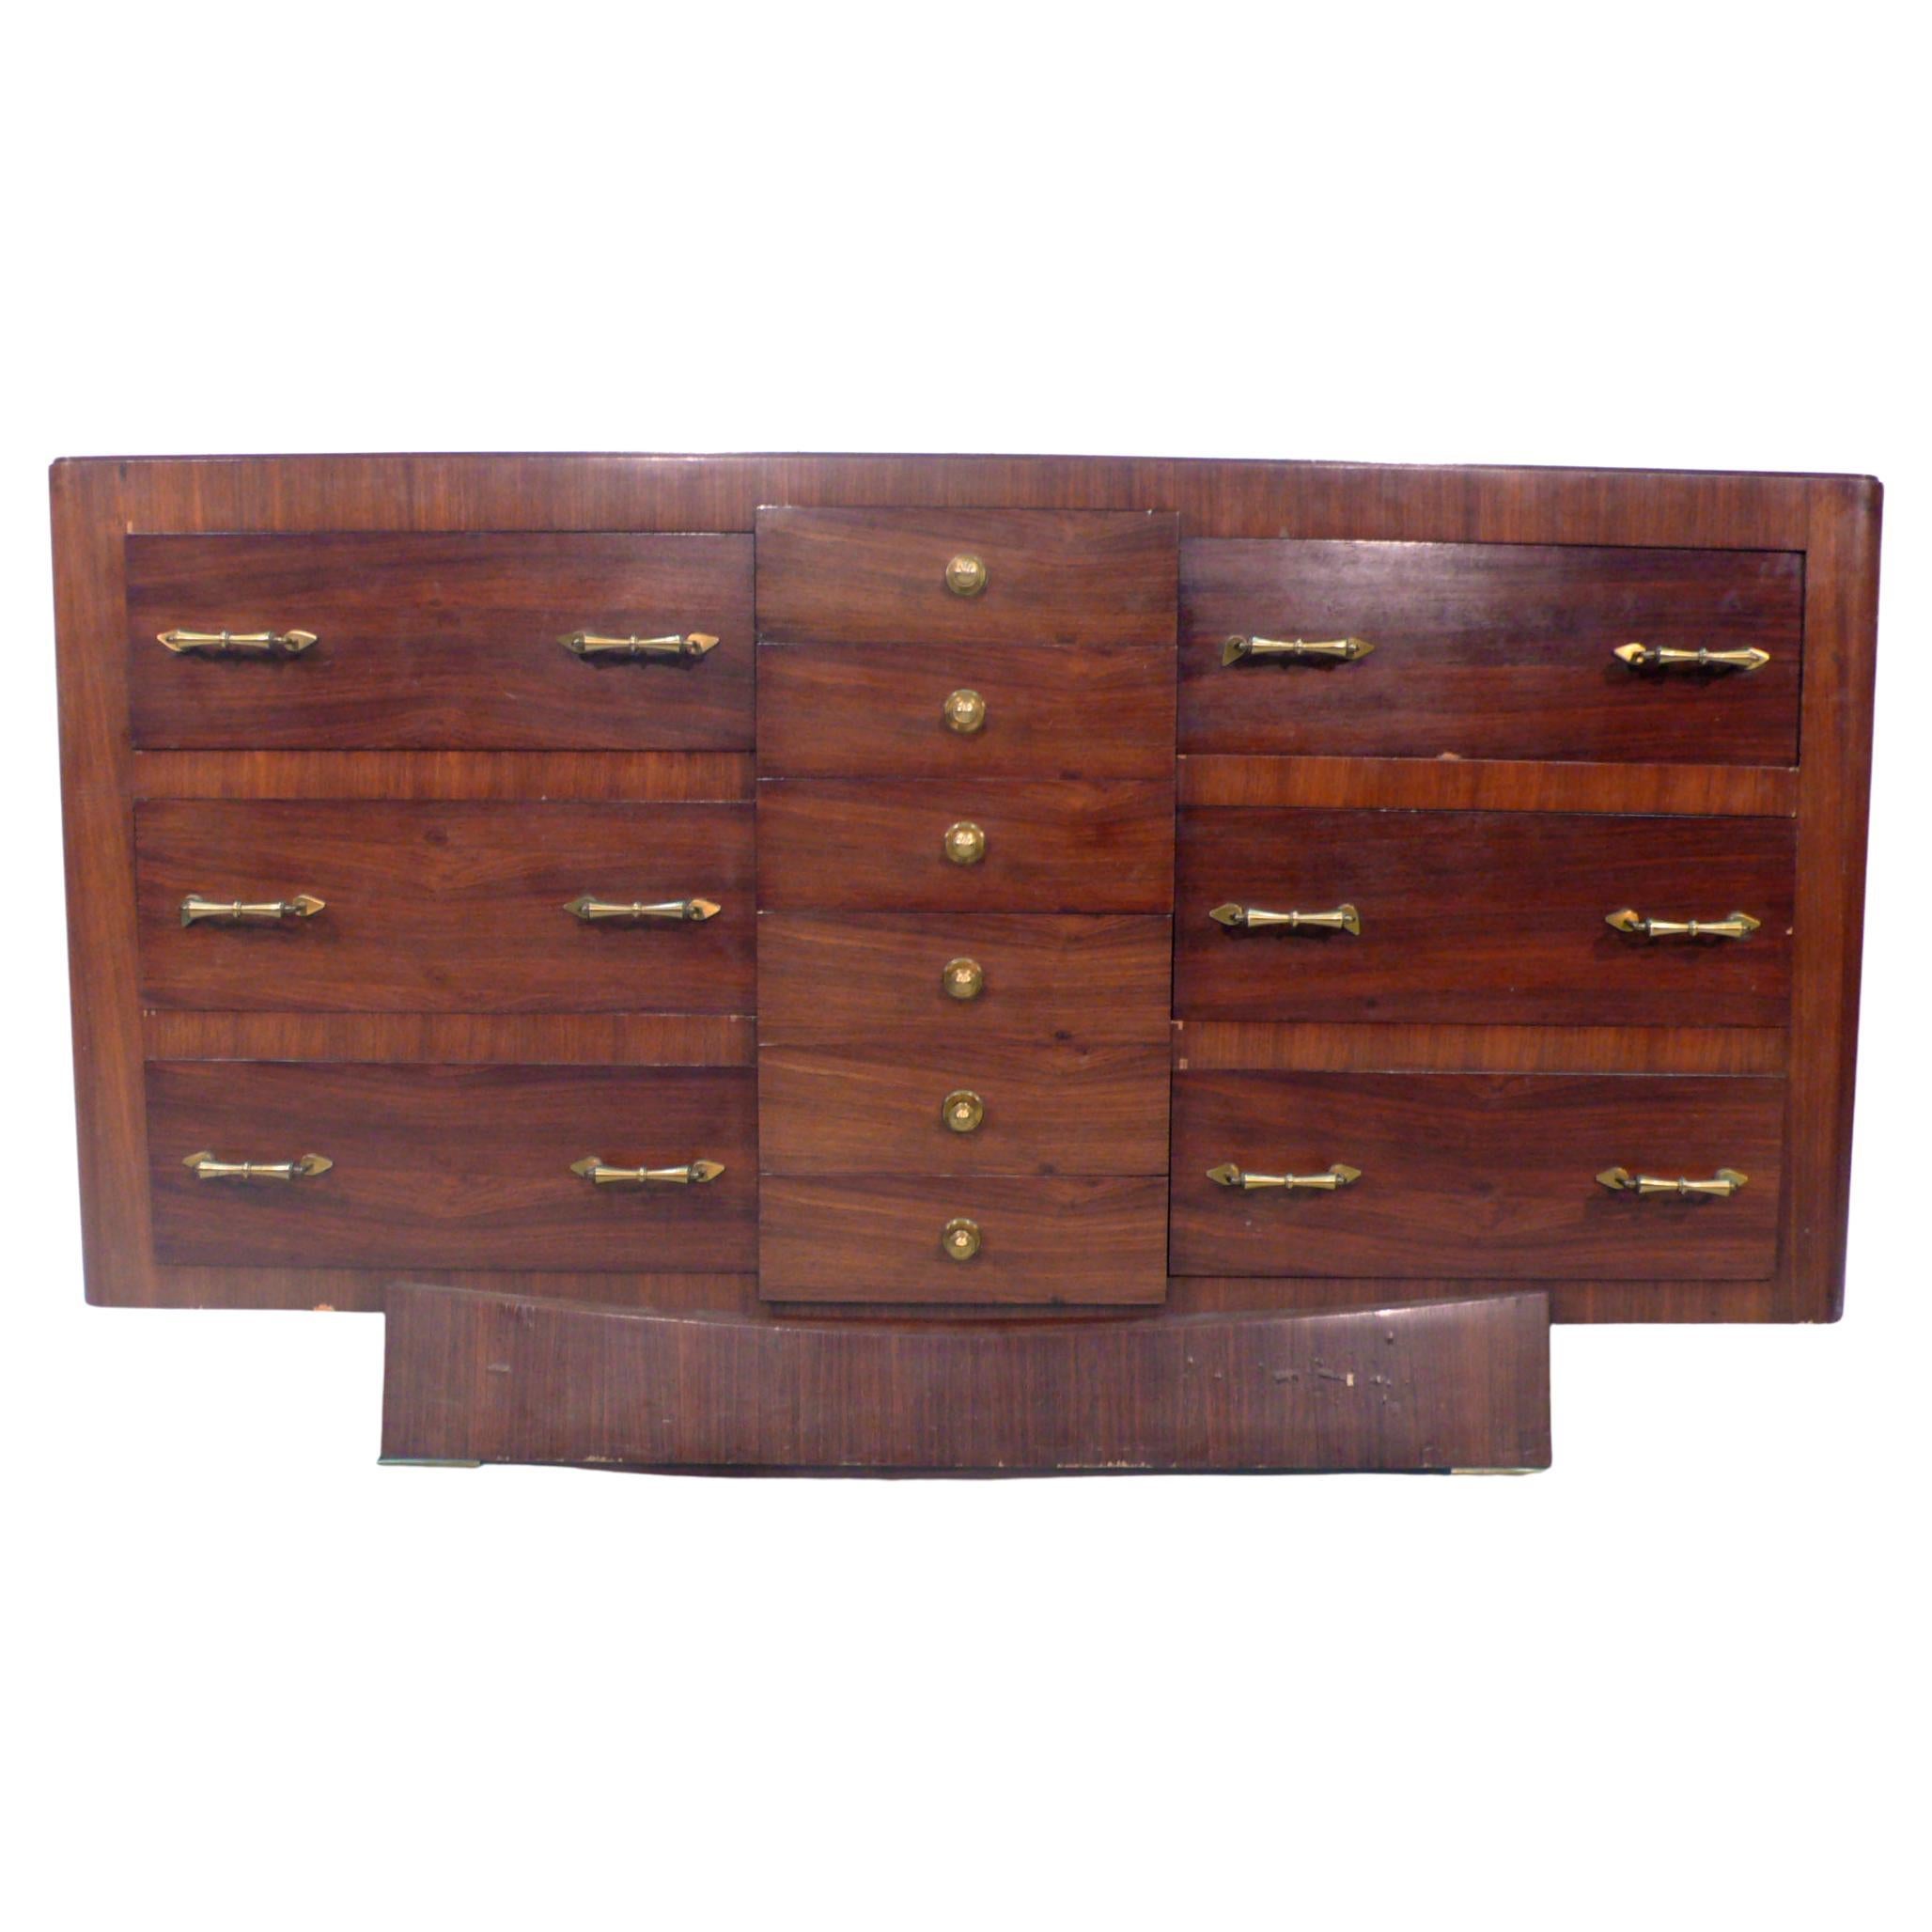 Large Art Déco Credenza / Chest of Drawers by Alfred Porteneuve